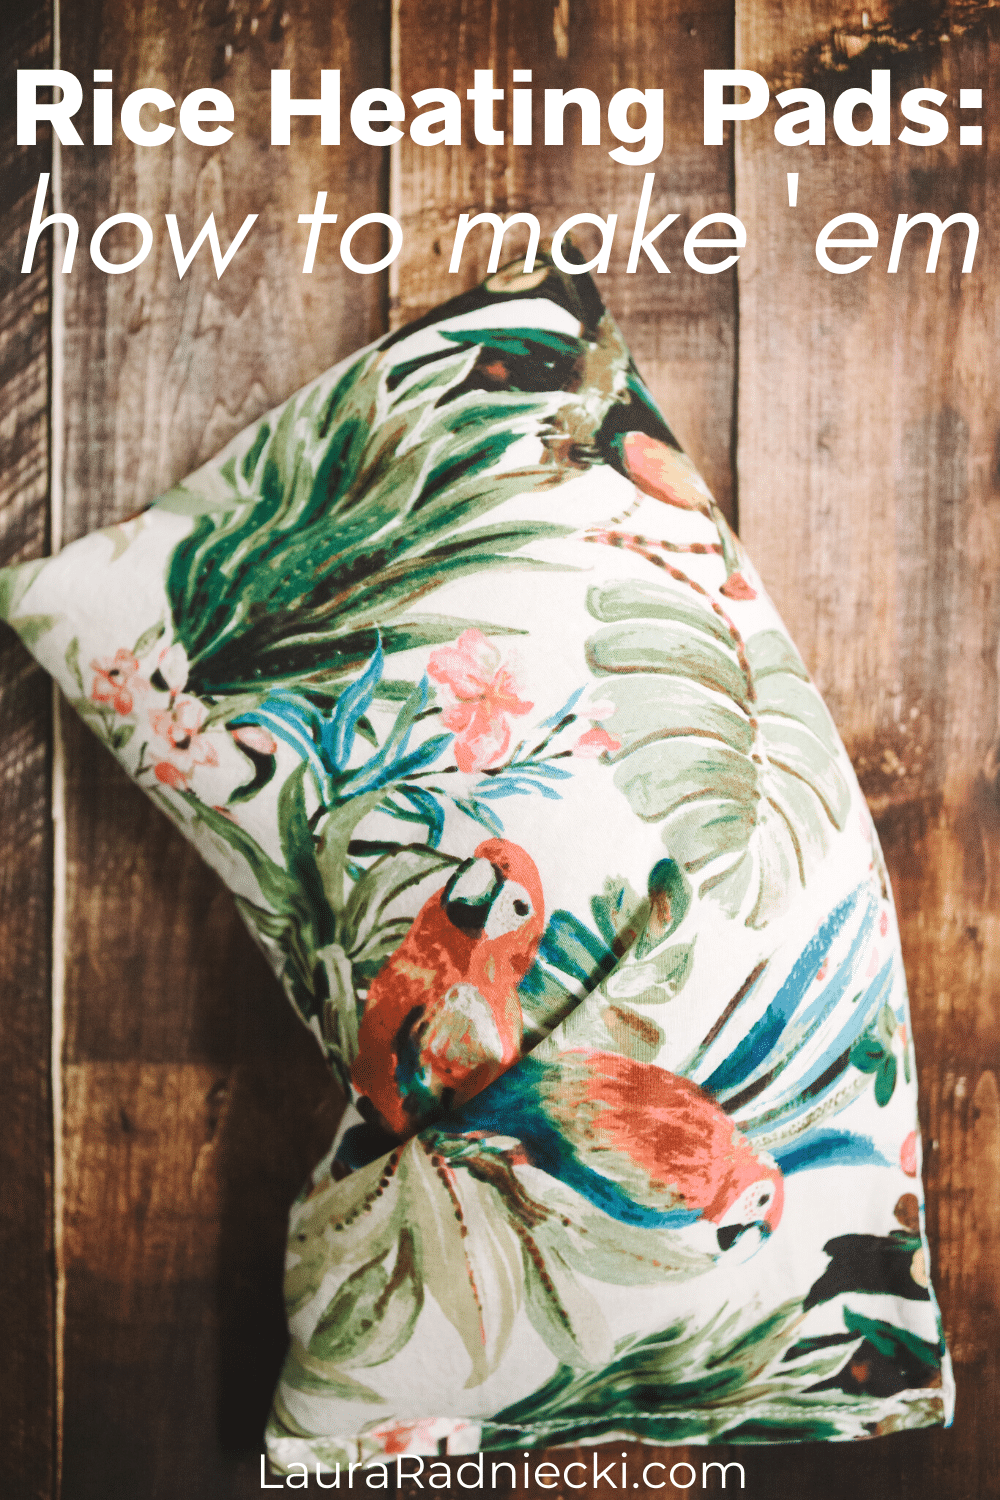 How to Make a Rice Heating Pad